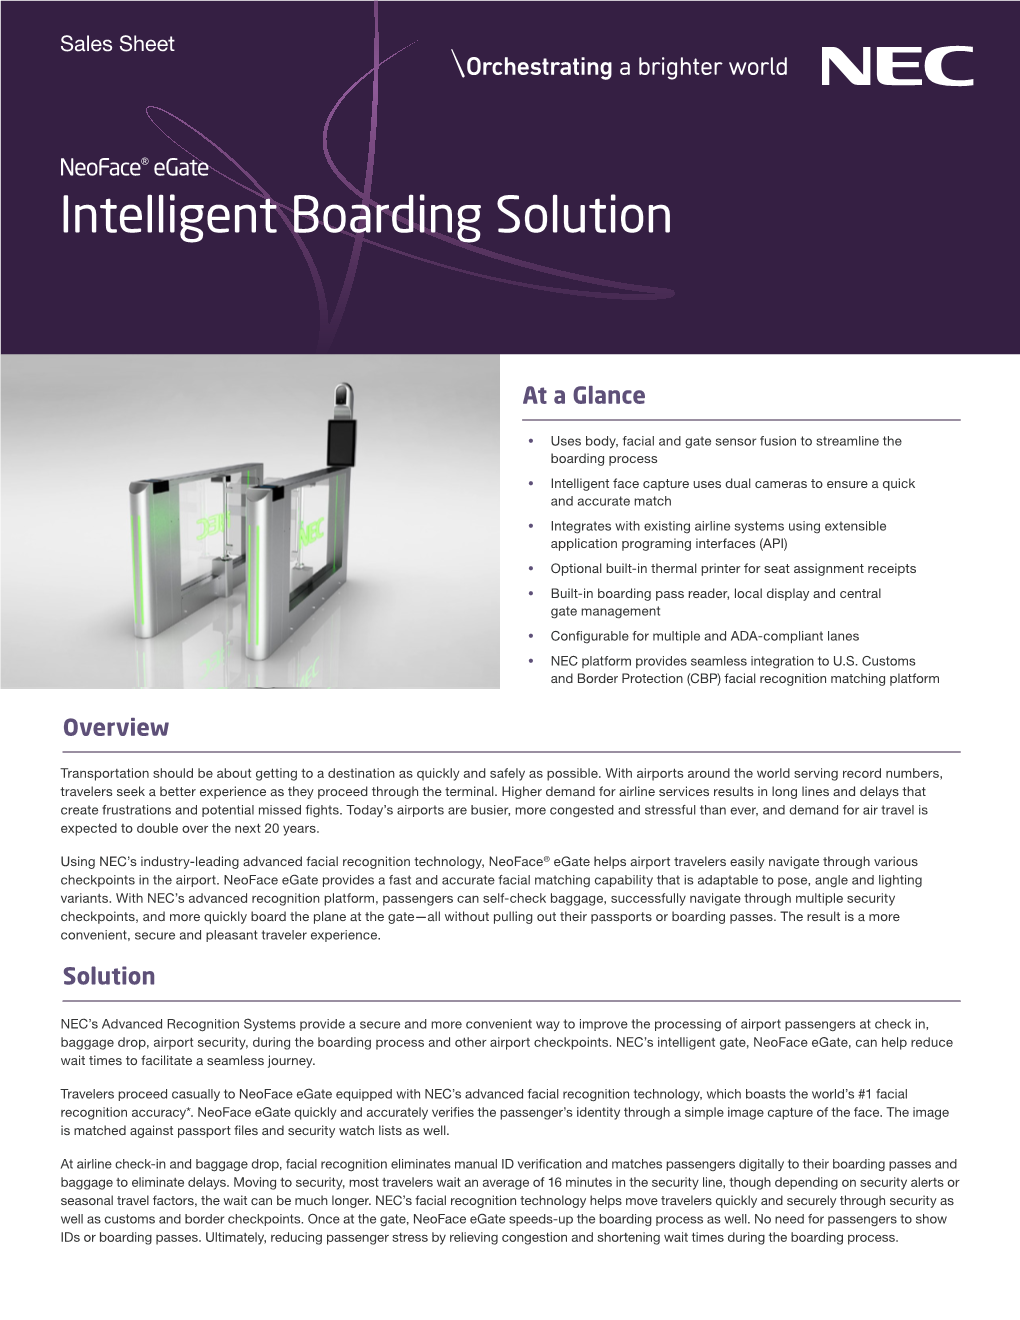 Neoface® Egate Intelligentsmart Communications Boarding Solution for Small and Medium Businesses